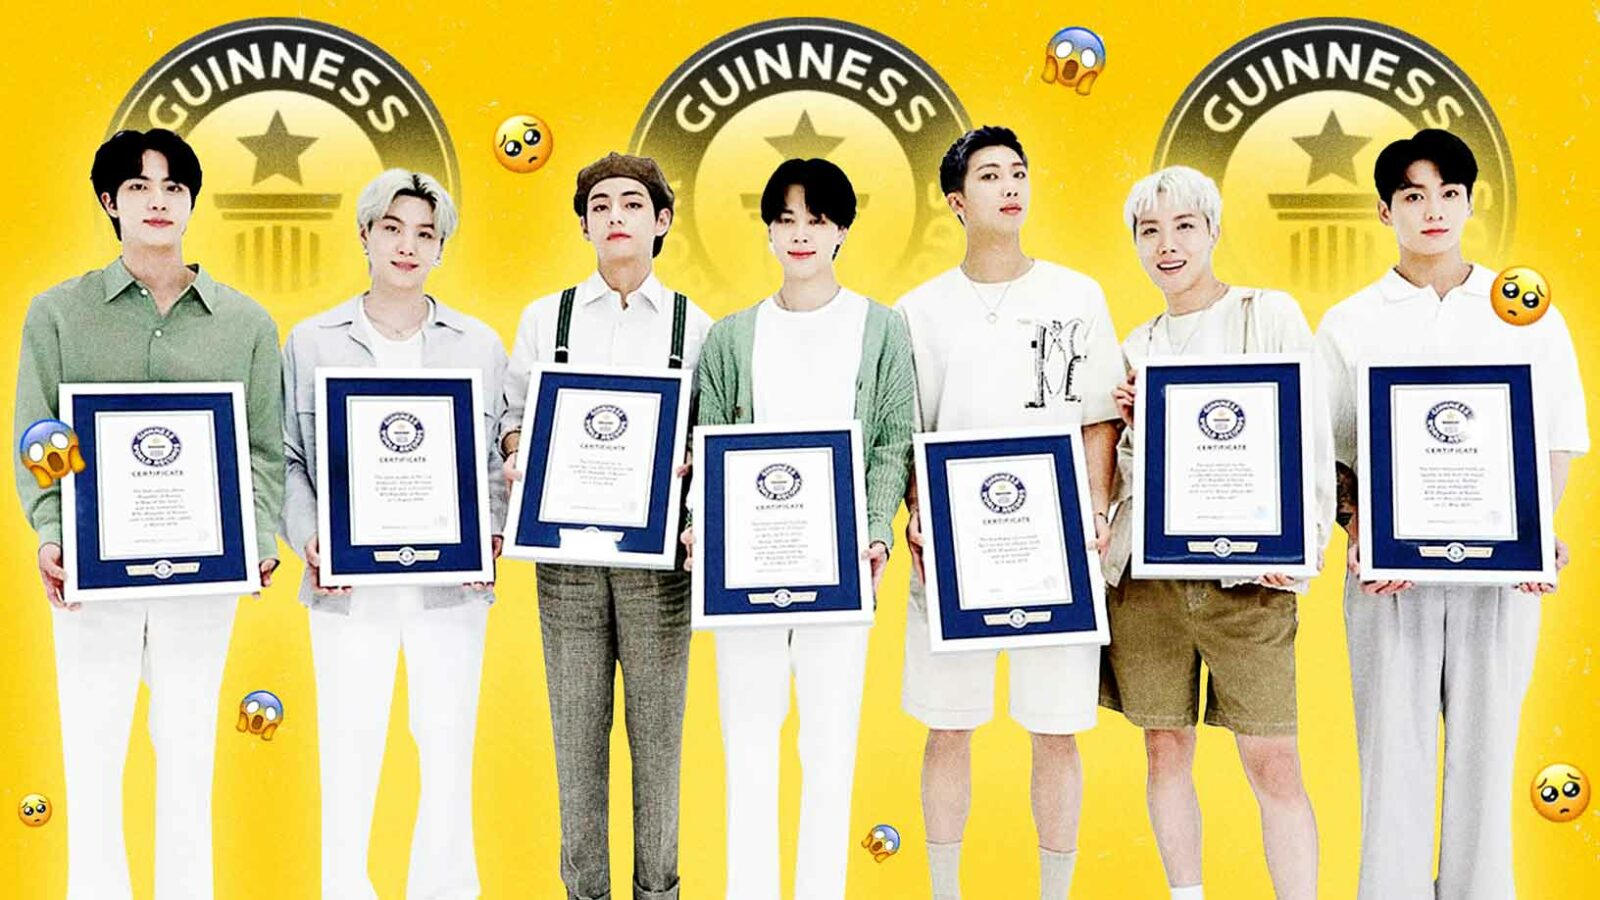 EVERY WORLD RECORD BTS HAS OFFICIALLY BROKEN, ACCORDING TO GUINNESS WORLD RECORDS